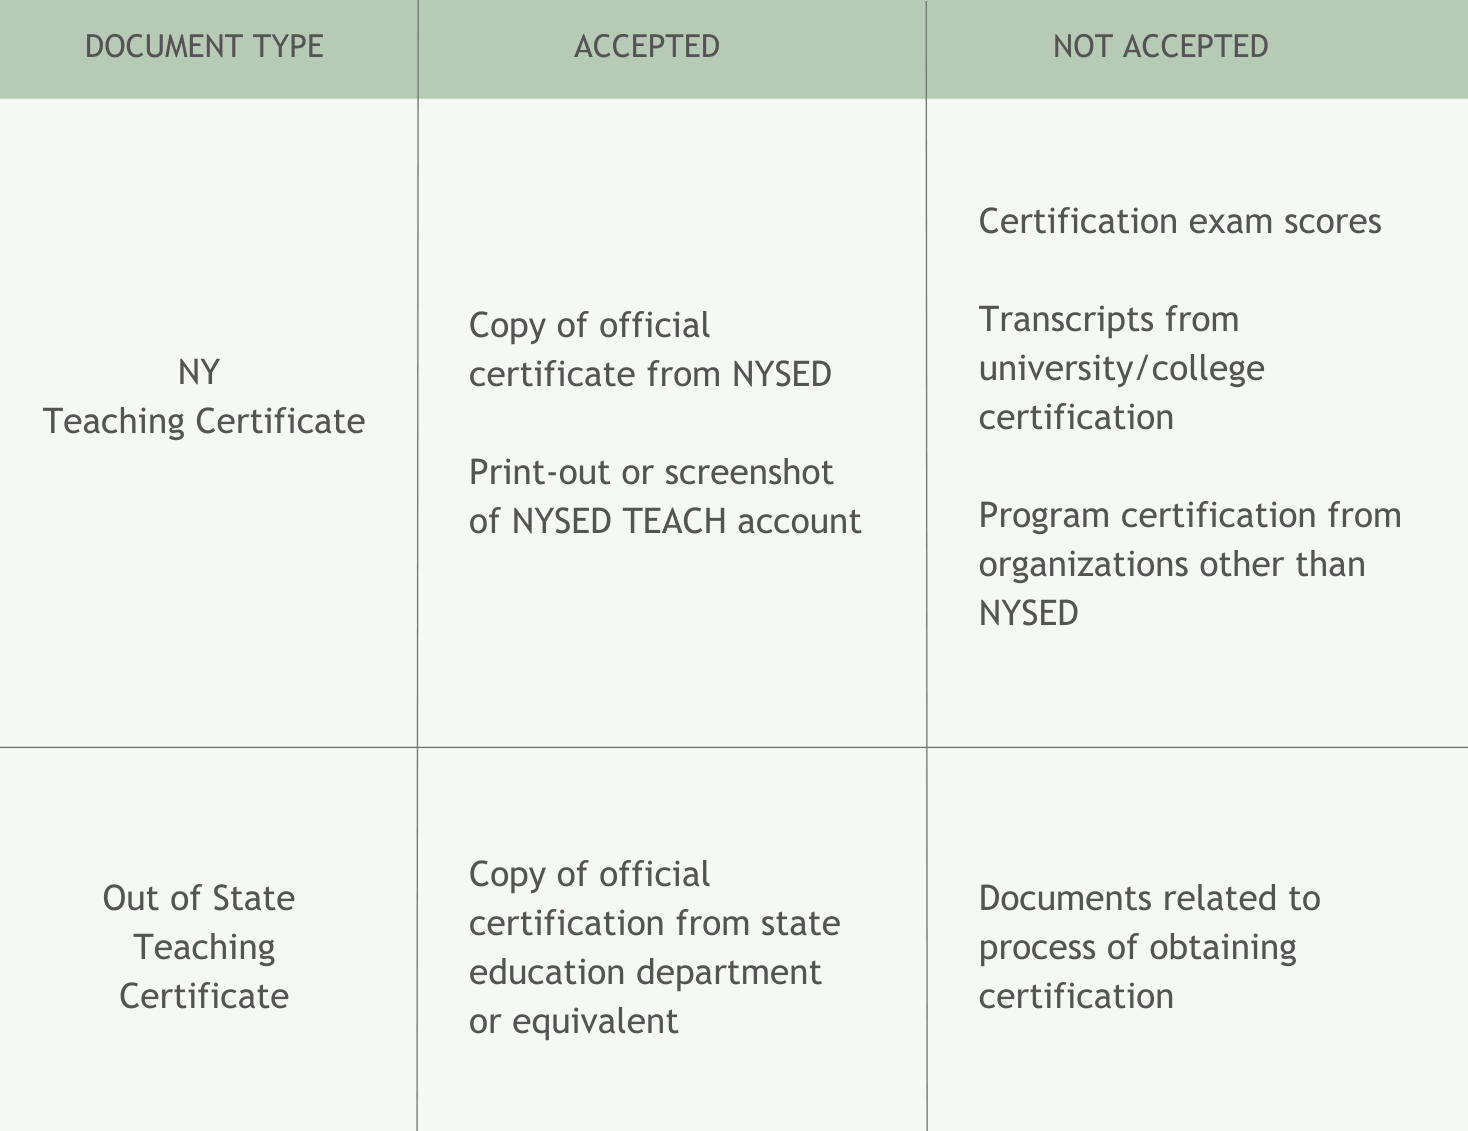 ny teaching certificates and out of state .png